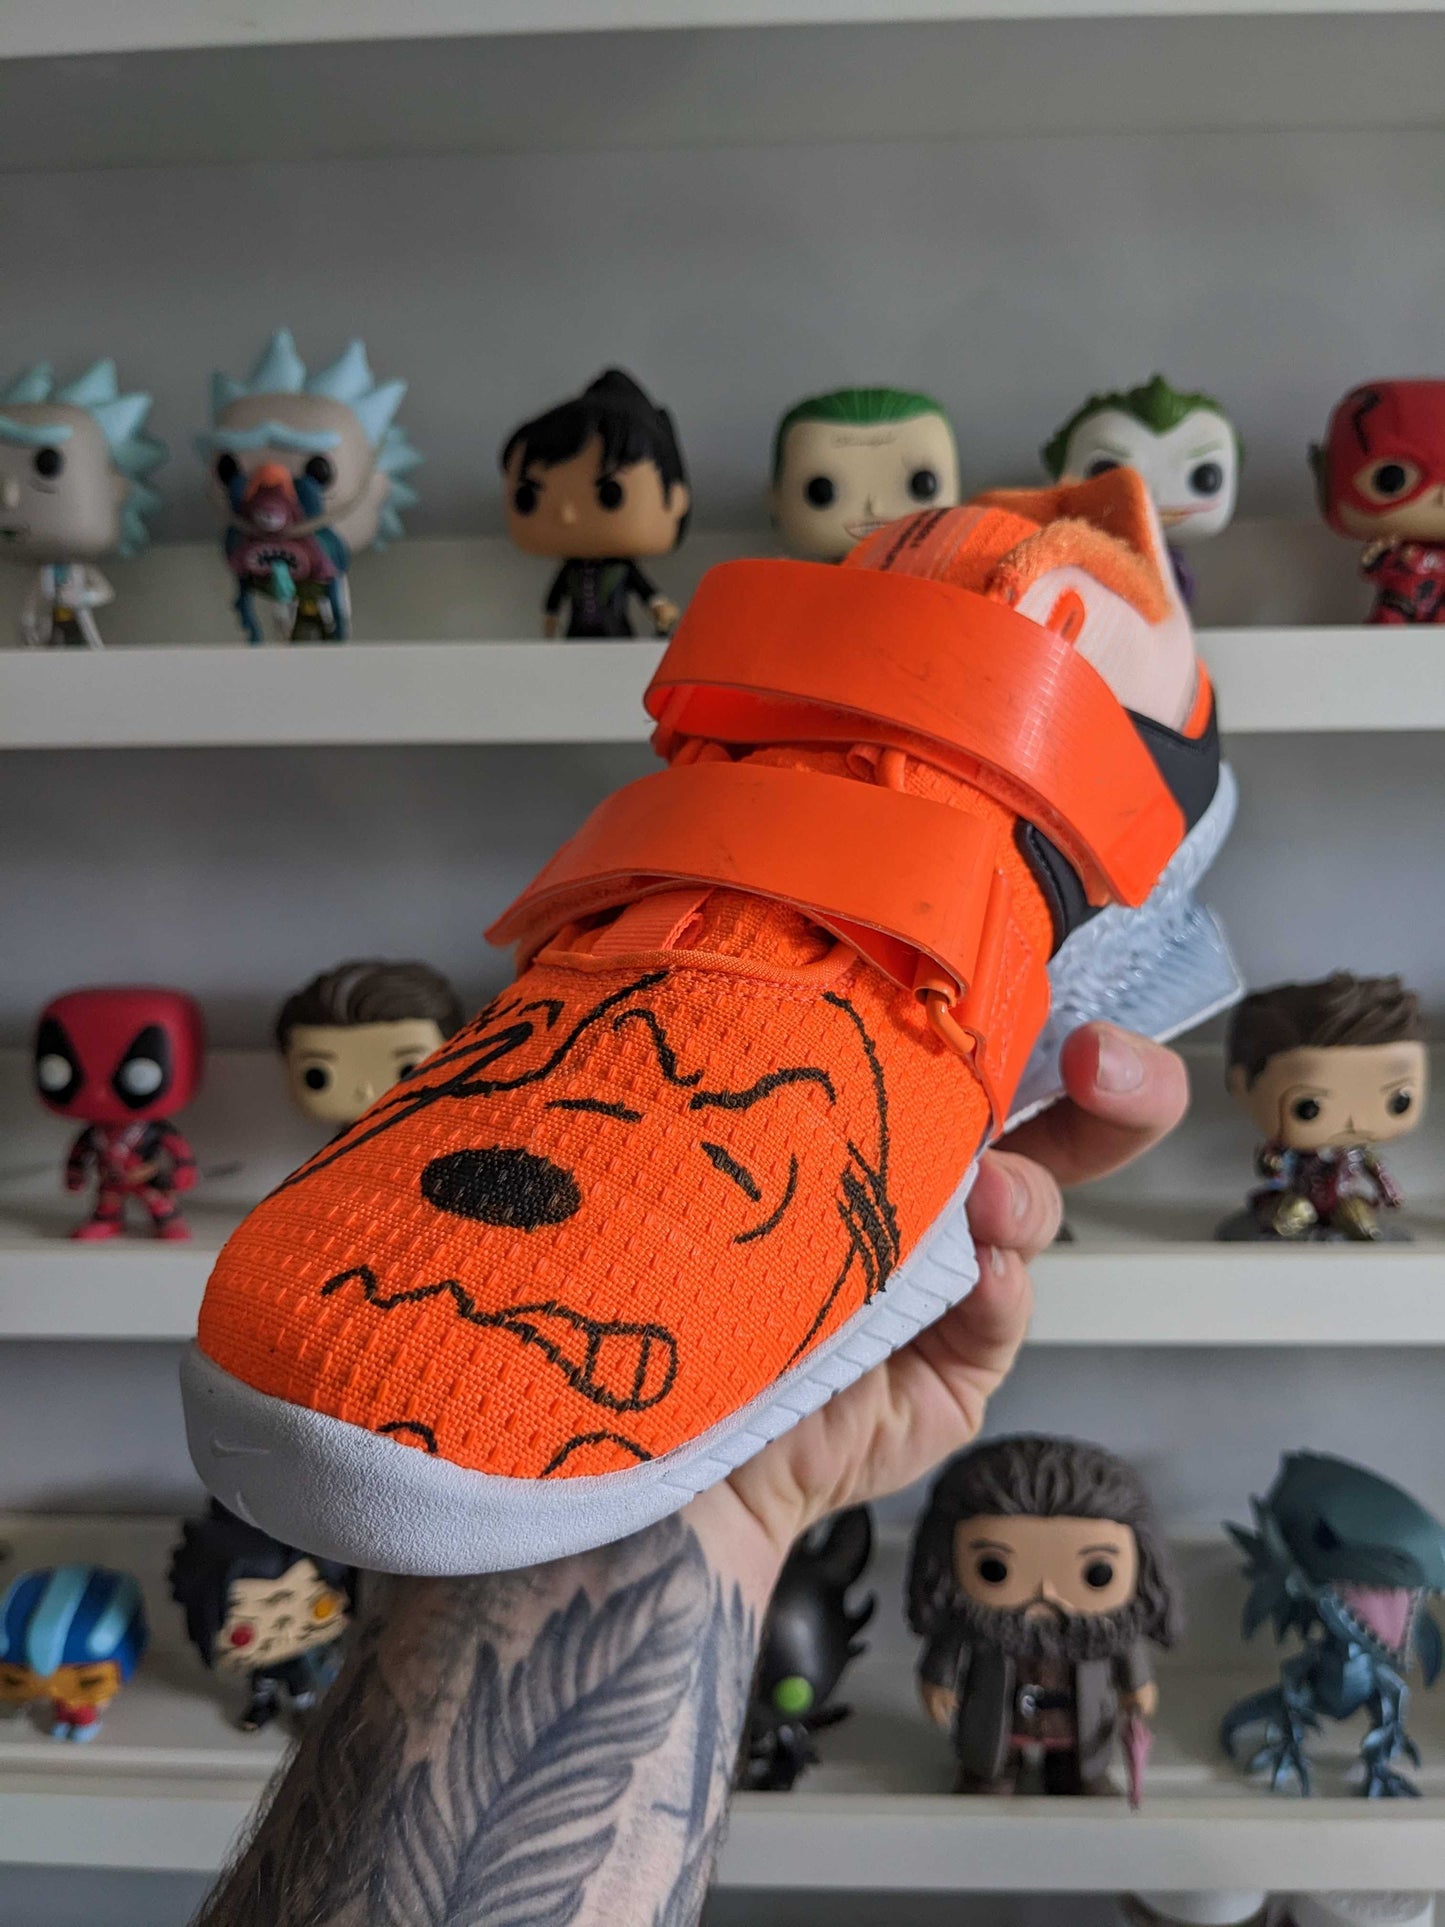 Popeye + Snoopy custom weightlifting lifter shoes